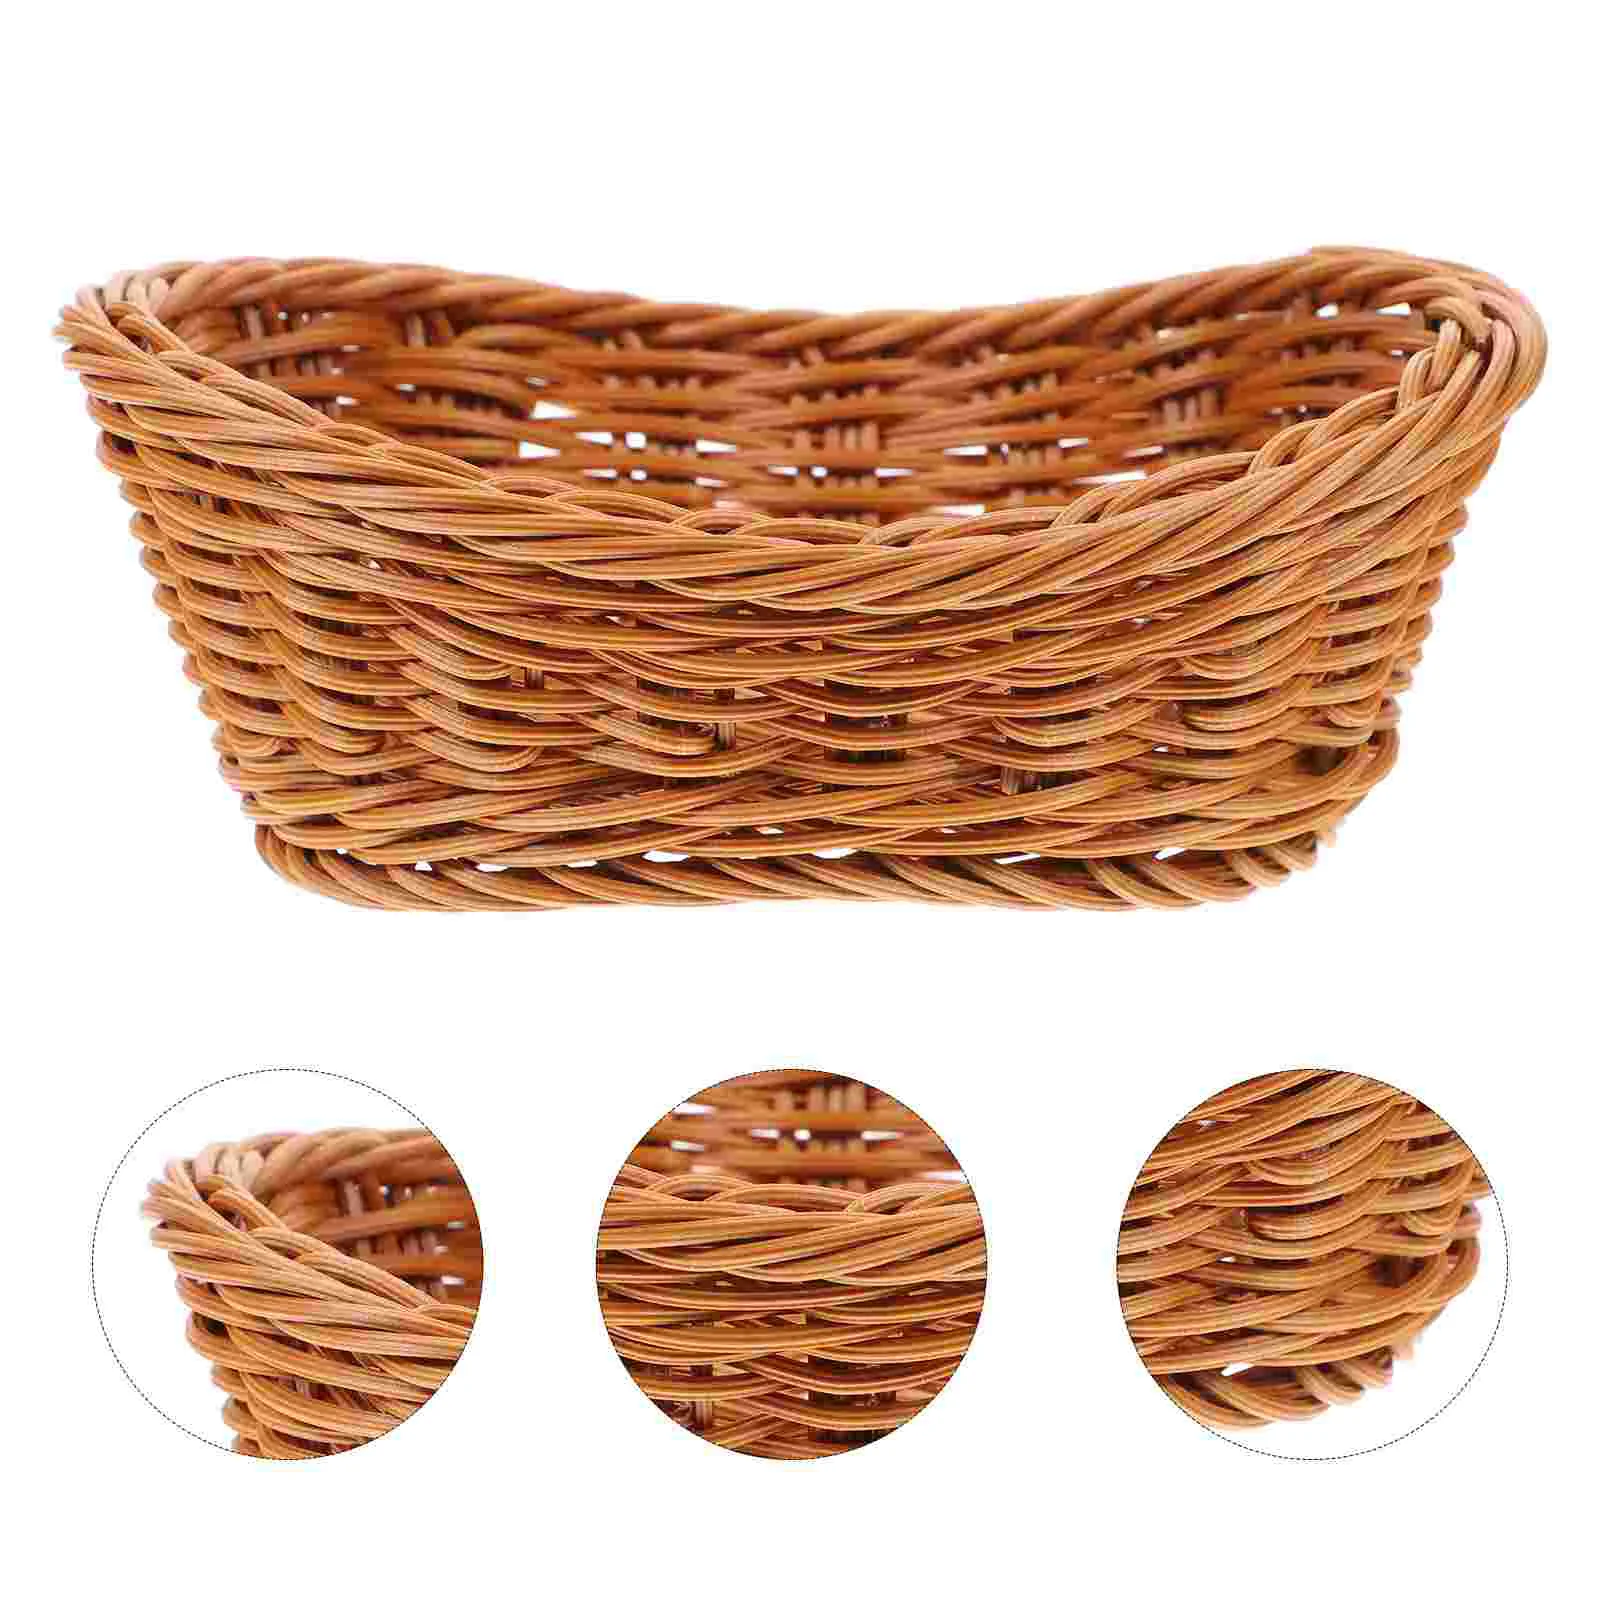 

Woven Basket Household Bread Party Fruits Container Square Snacks Storage Baskets Dried Flowers Wear-resistant Safe Dessert